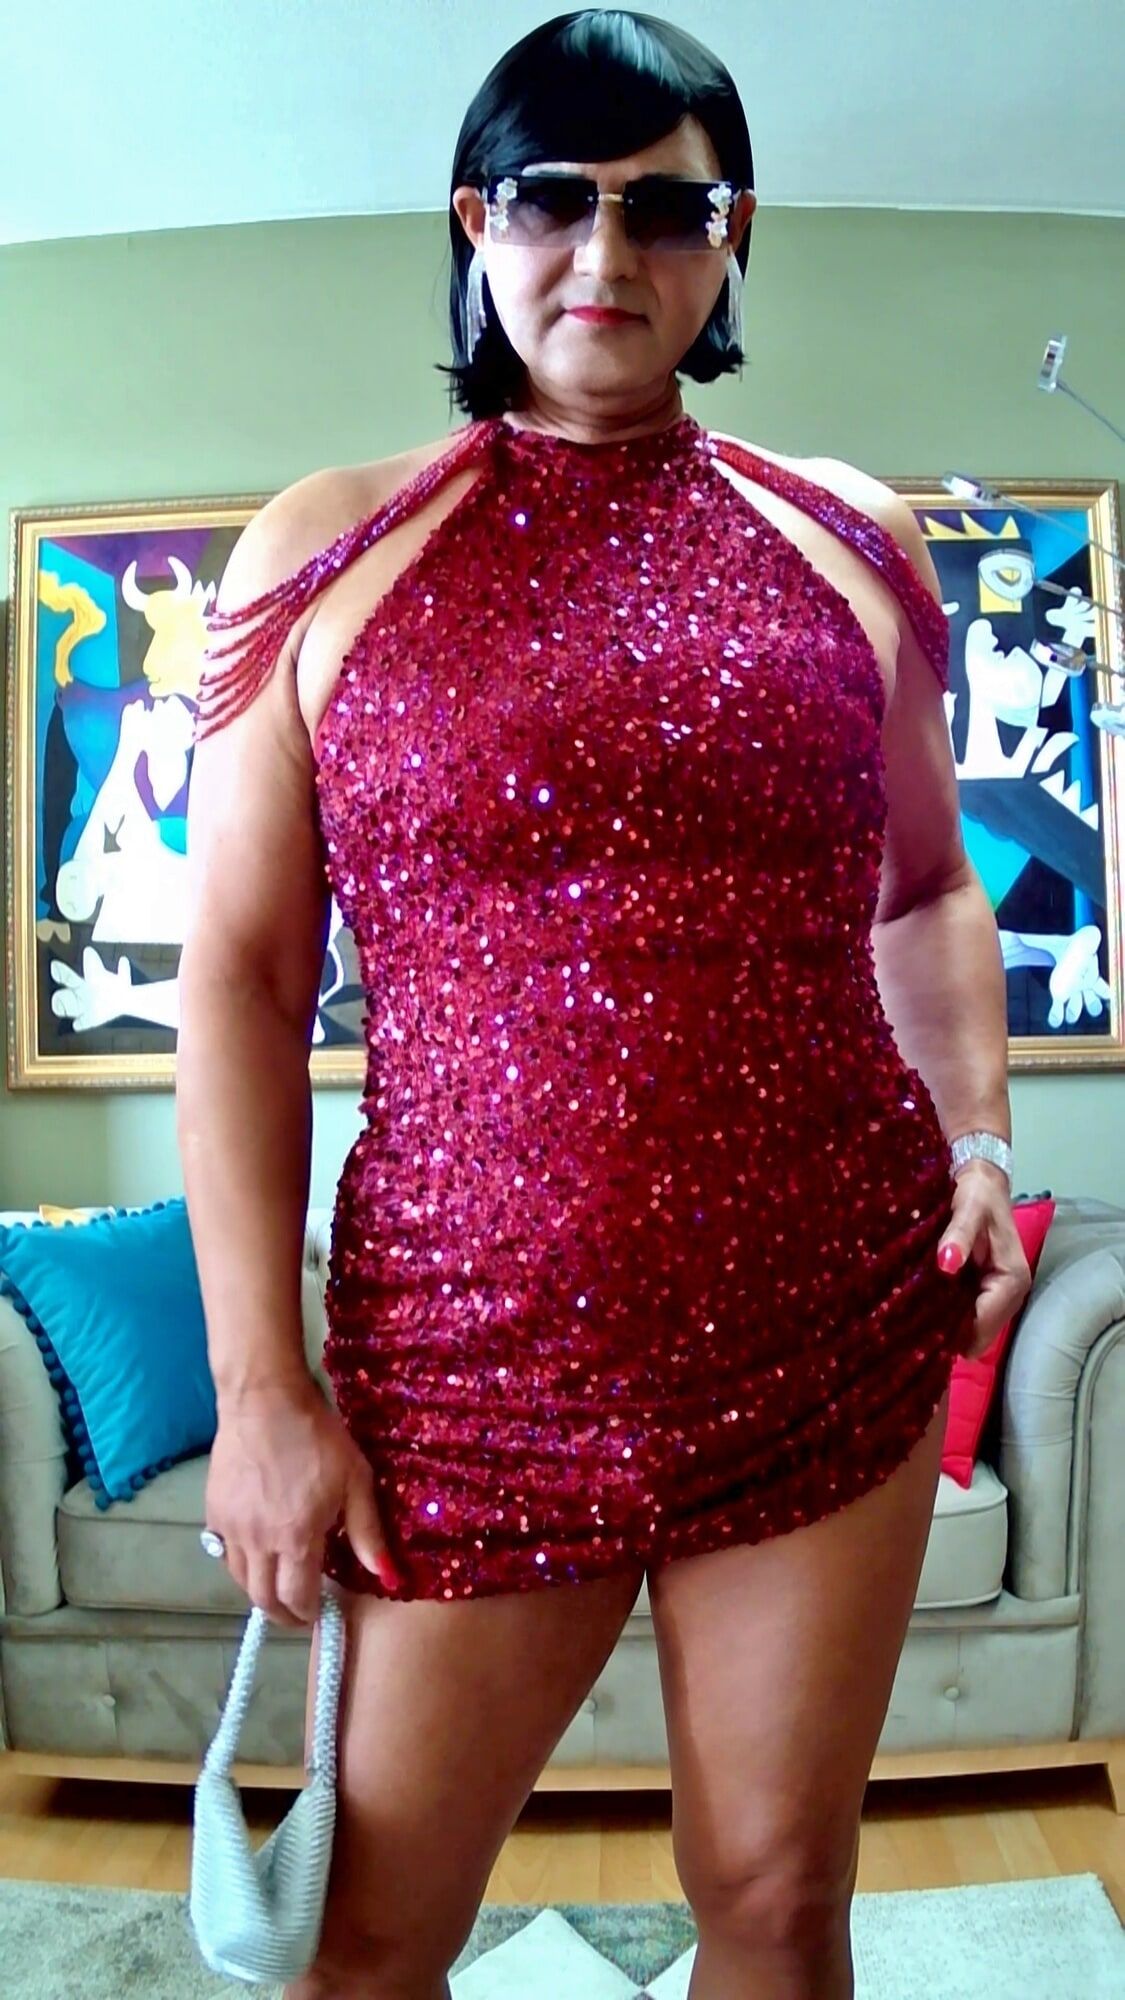 Me in red Dress #13